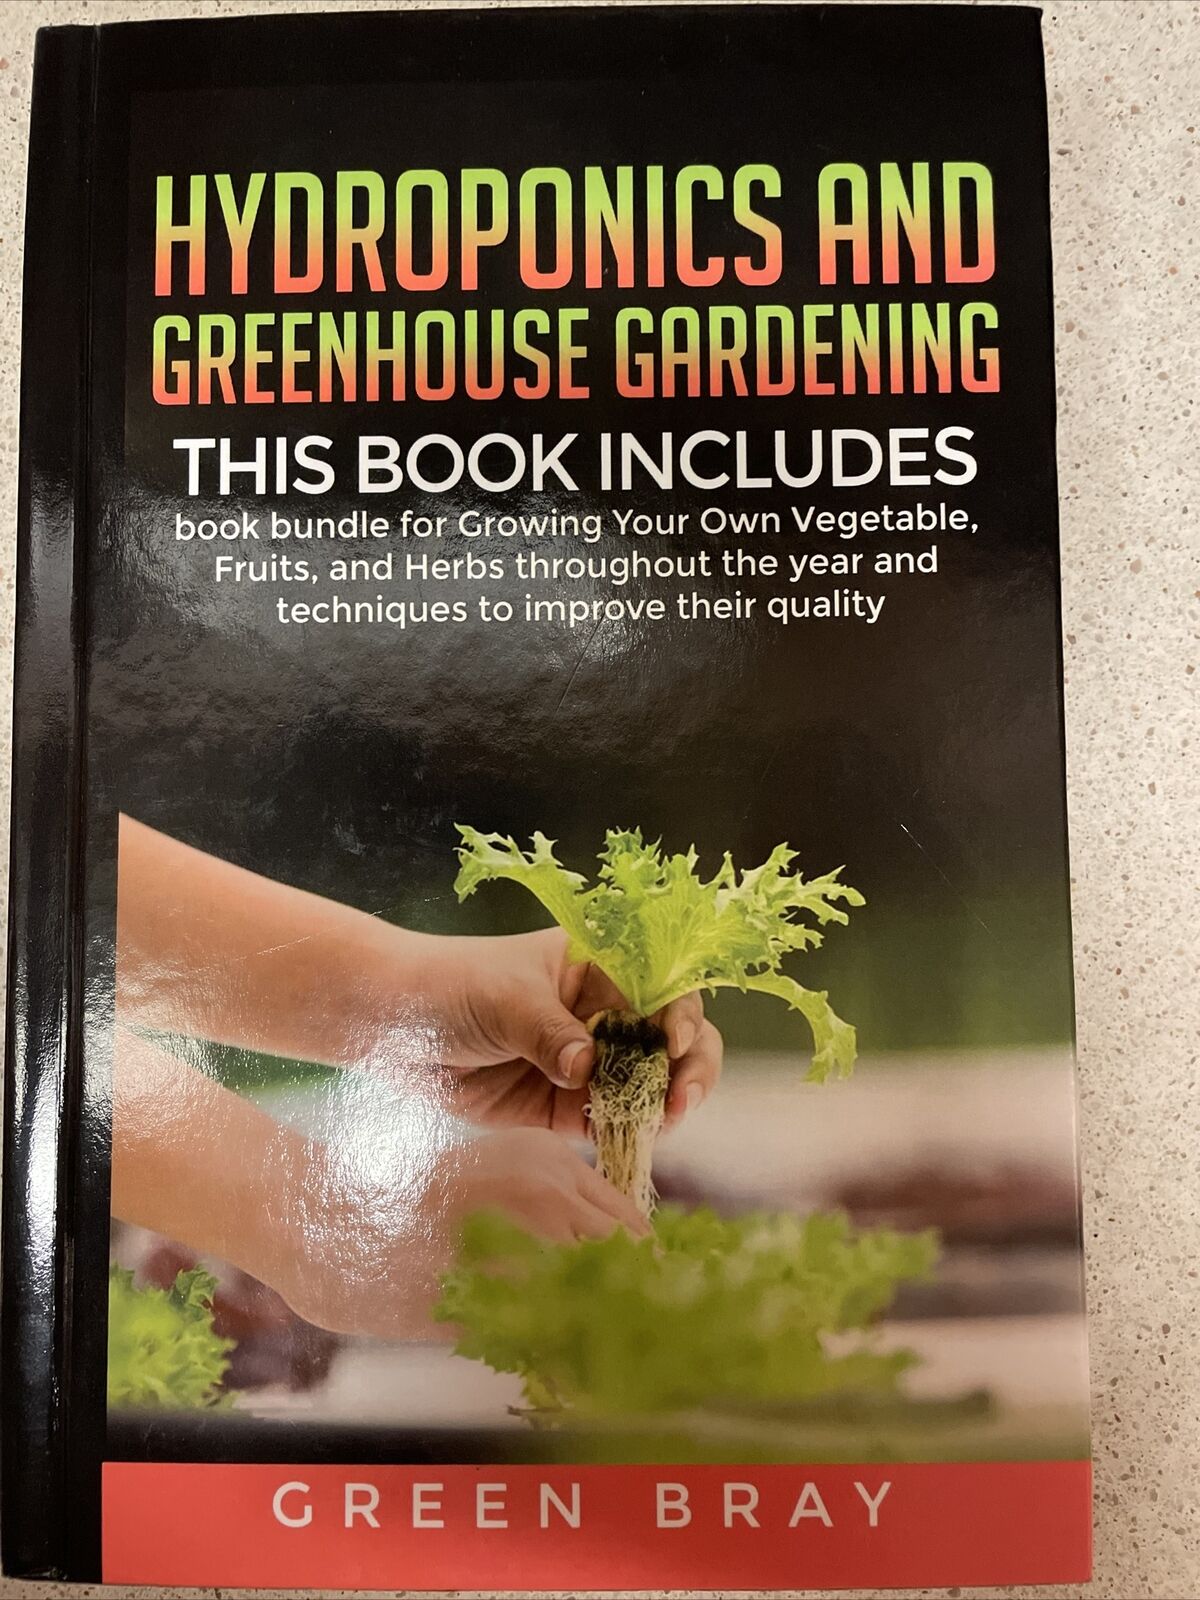 Hydroponics And Greenhouse Gardening - Green Bray - Hardcover